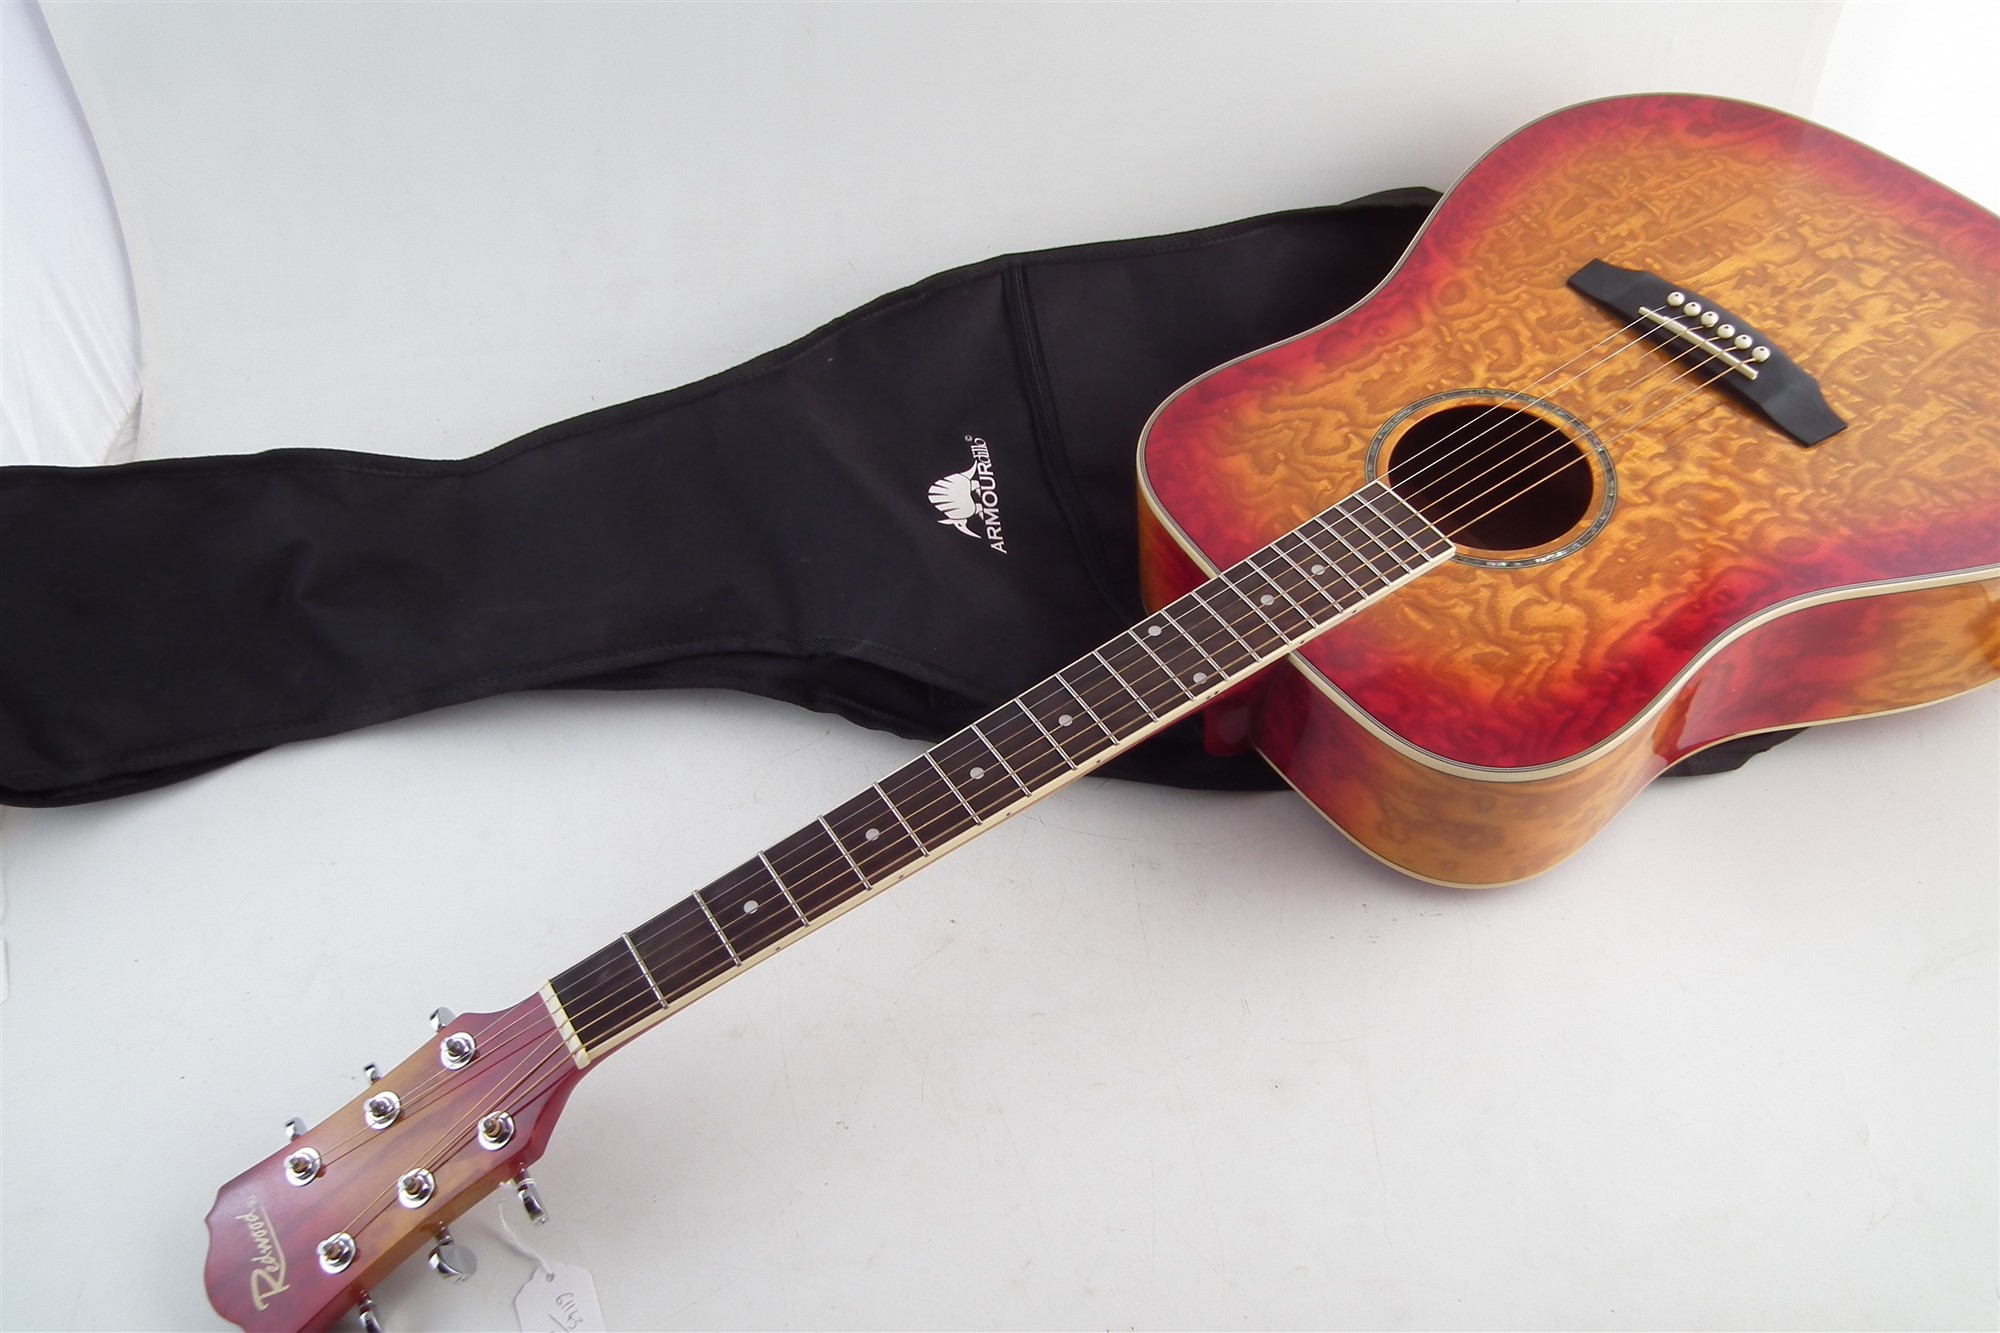 Redwood steel string acoustic guitar with soft case - Image 7 of 7